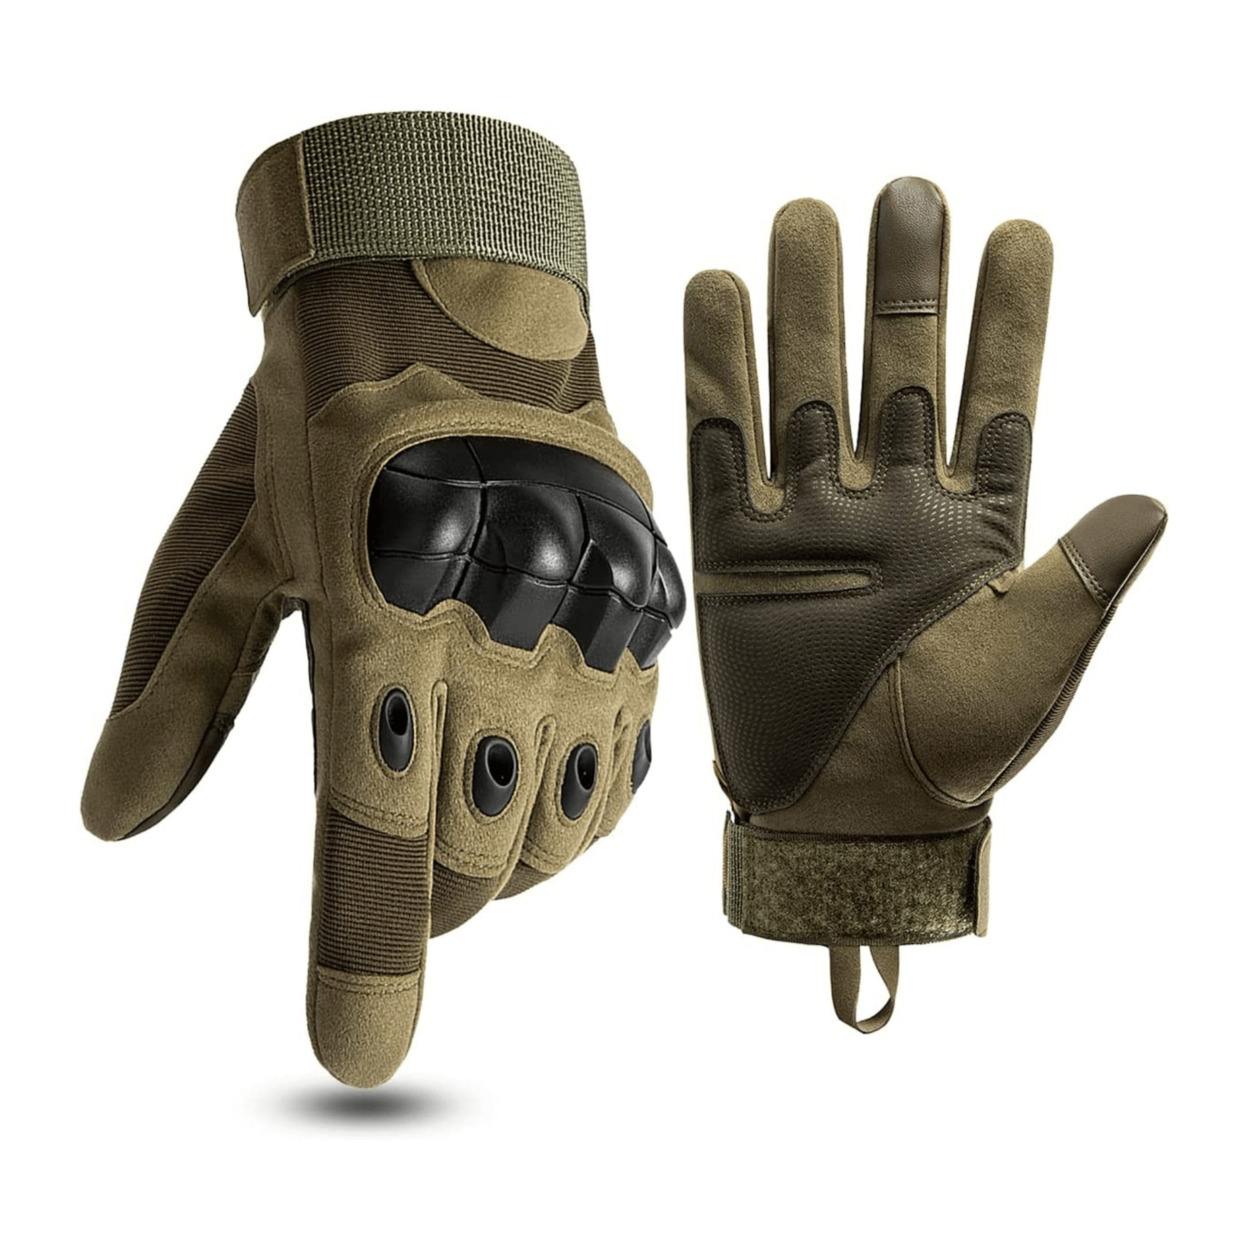 Tactical Military Airsoft Gloves For Outdoor Sports, Paintball, And Motorcycling With Touchscreen Fingertip Capability - Tan, Large